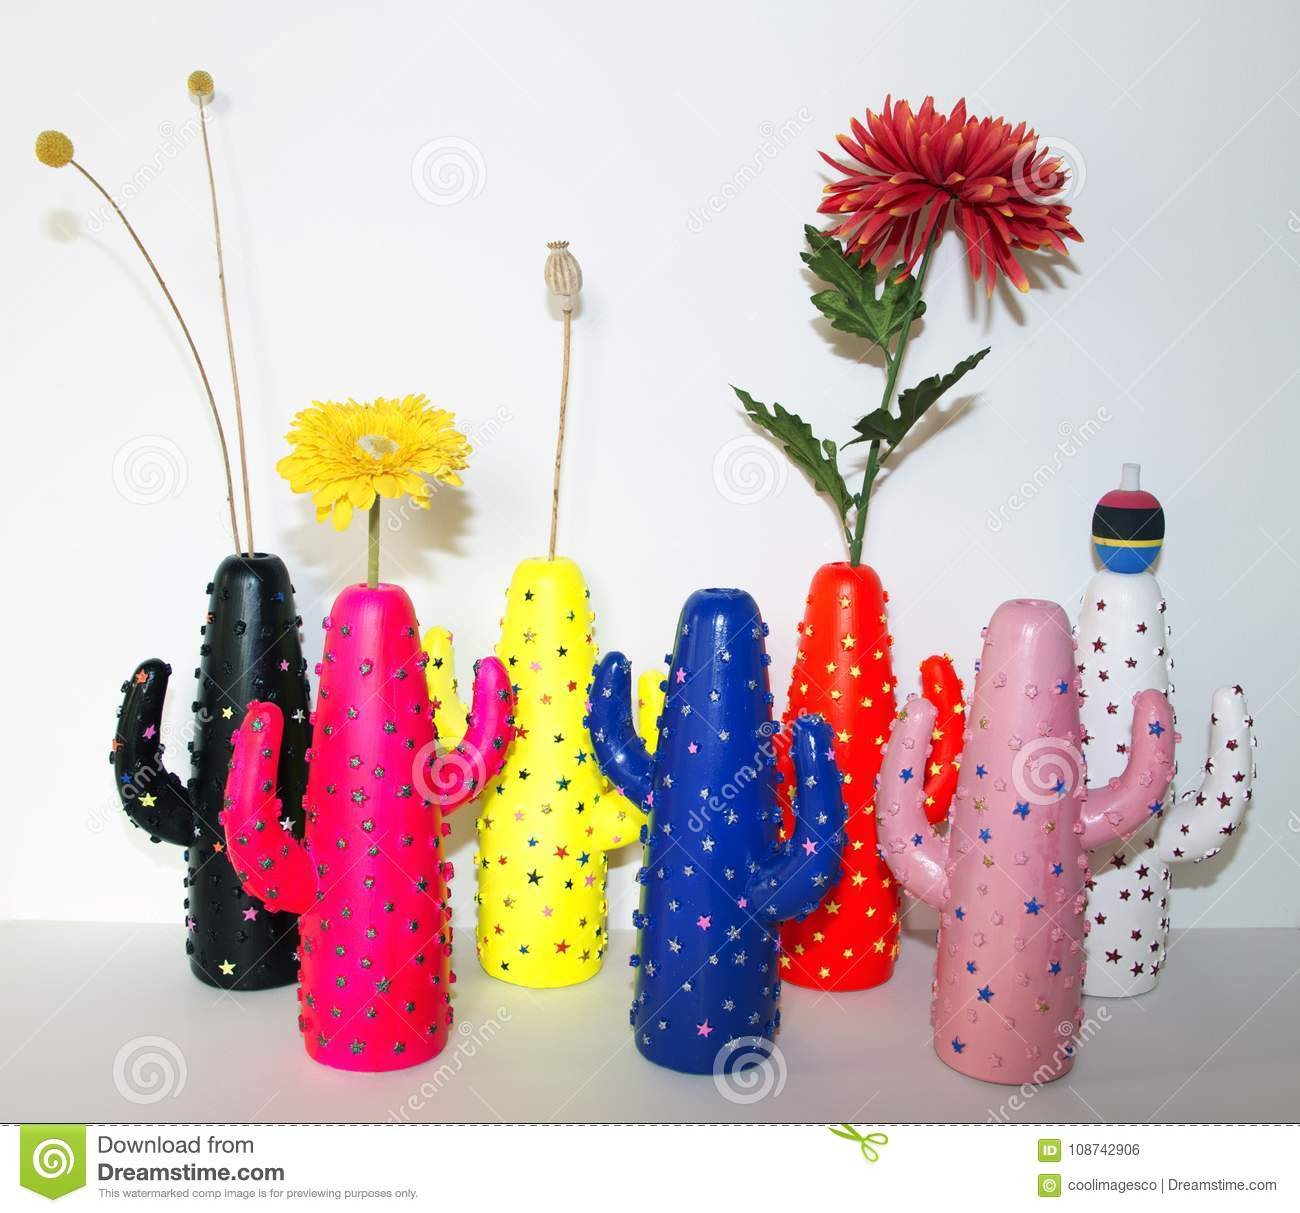 16 attractive Still Life Vase Of Flowers 2024 free download still life vase of flowers of colorful cactus shaped vases and flowers as a still life decoration for colorful cactus shaped vases and flowers as a still life decoration